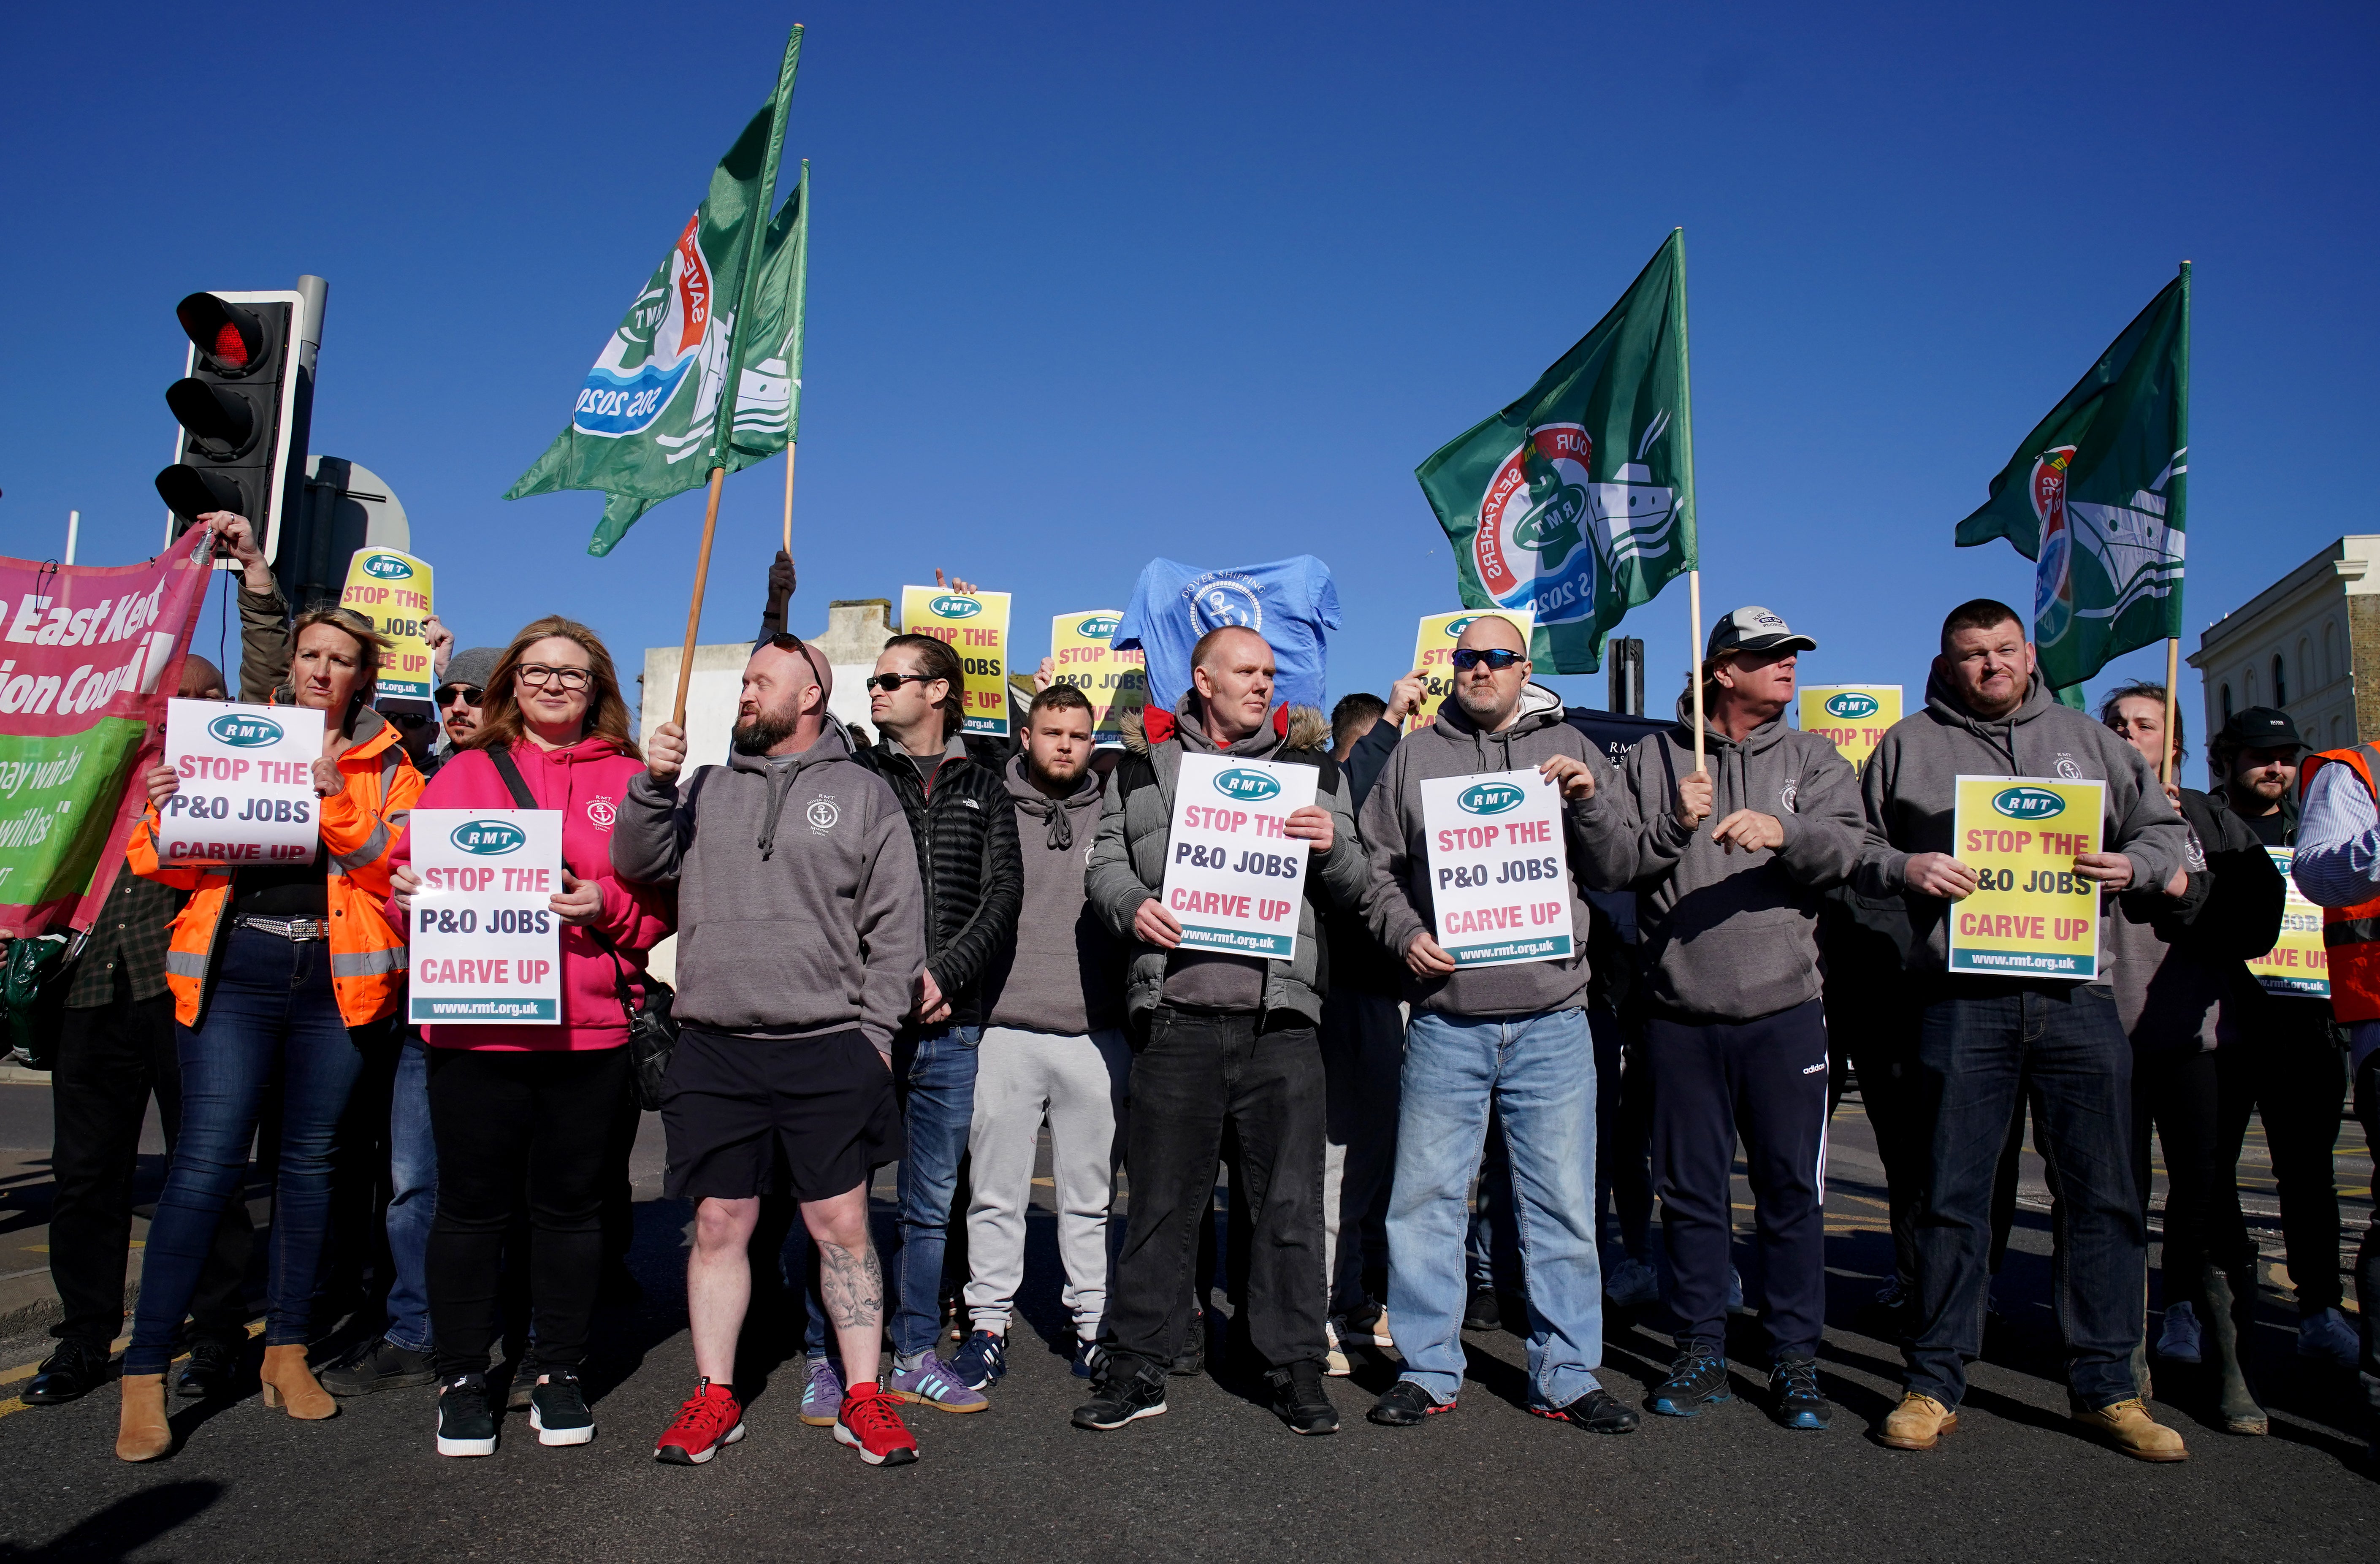 Former P&O staff and RMT members block the road leading to the Port of Dover as P&O Ferries suspended sailings and handed 800 seafarers immediate severance notices, saying: “Our survival is dependent on making swift and significant changes.” Picture date: Thursday March 17, 2022. (Gareth Fuller/PA)